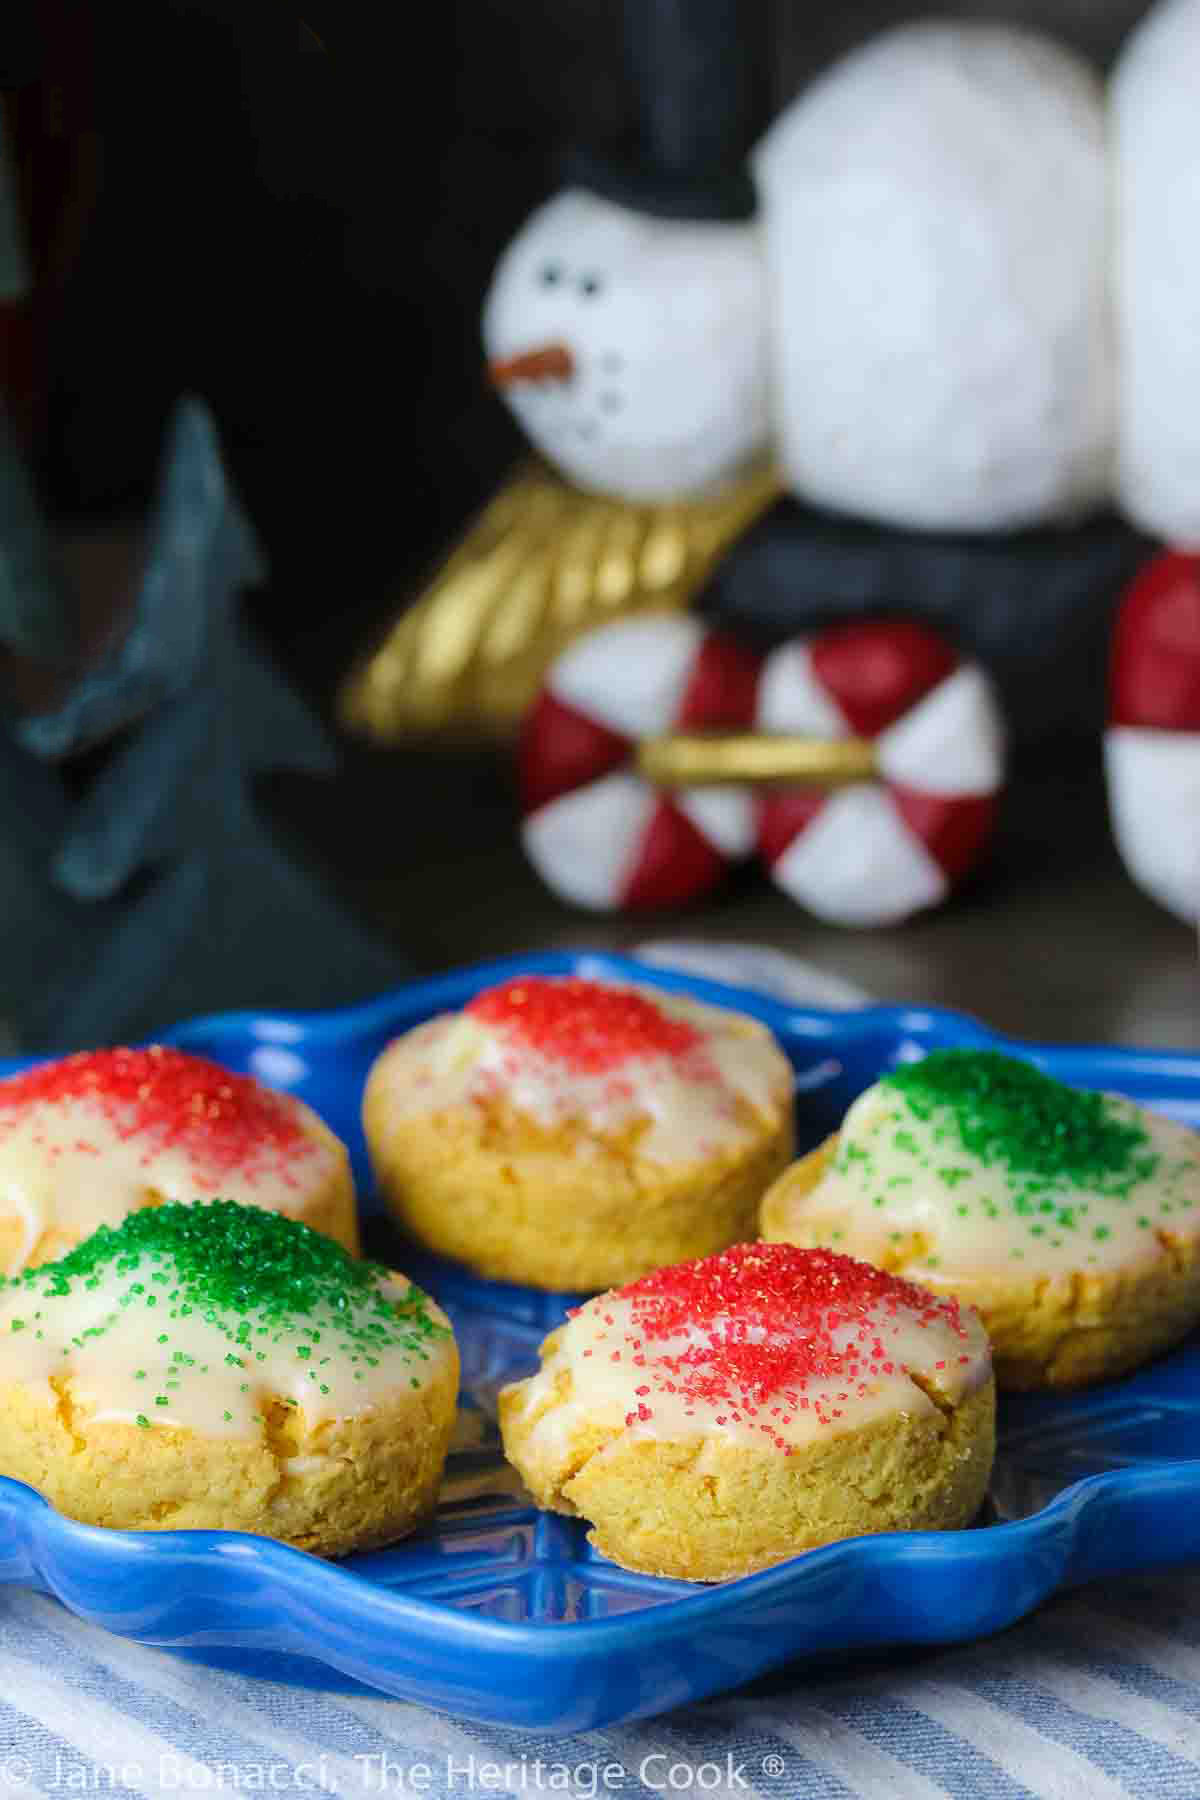 Five White Chocolate Sugared Scones with white chocolate glaze and sprinkled with red and green sugars, served on a blue star-shaped plate on top of a blue and white striped cloth, in front of festive hand-carved snowmen figures © 2023 Jane Bonacci, The Heritage Cook. 